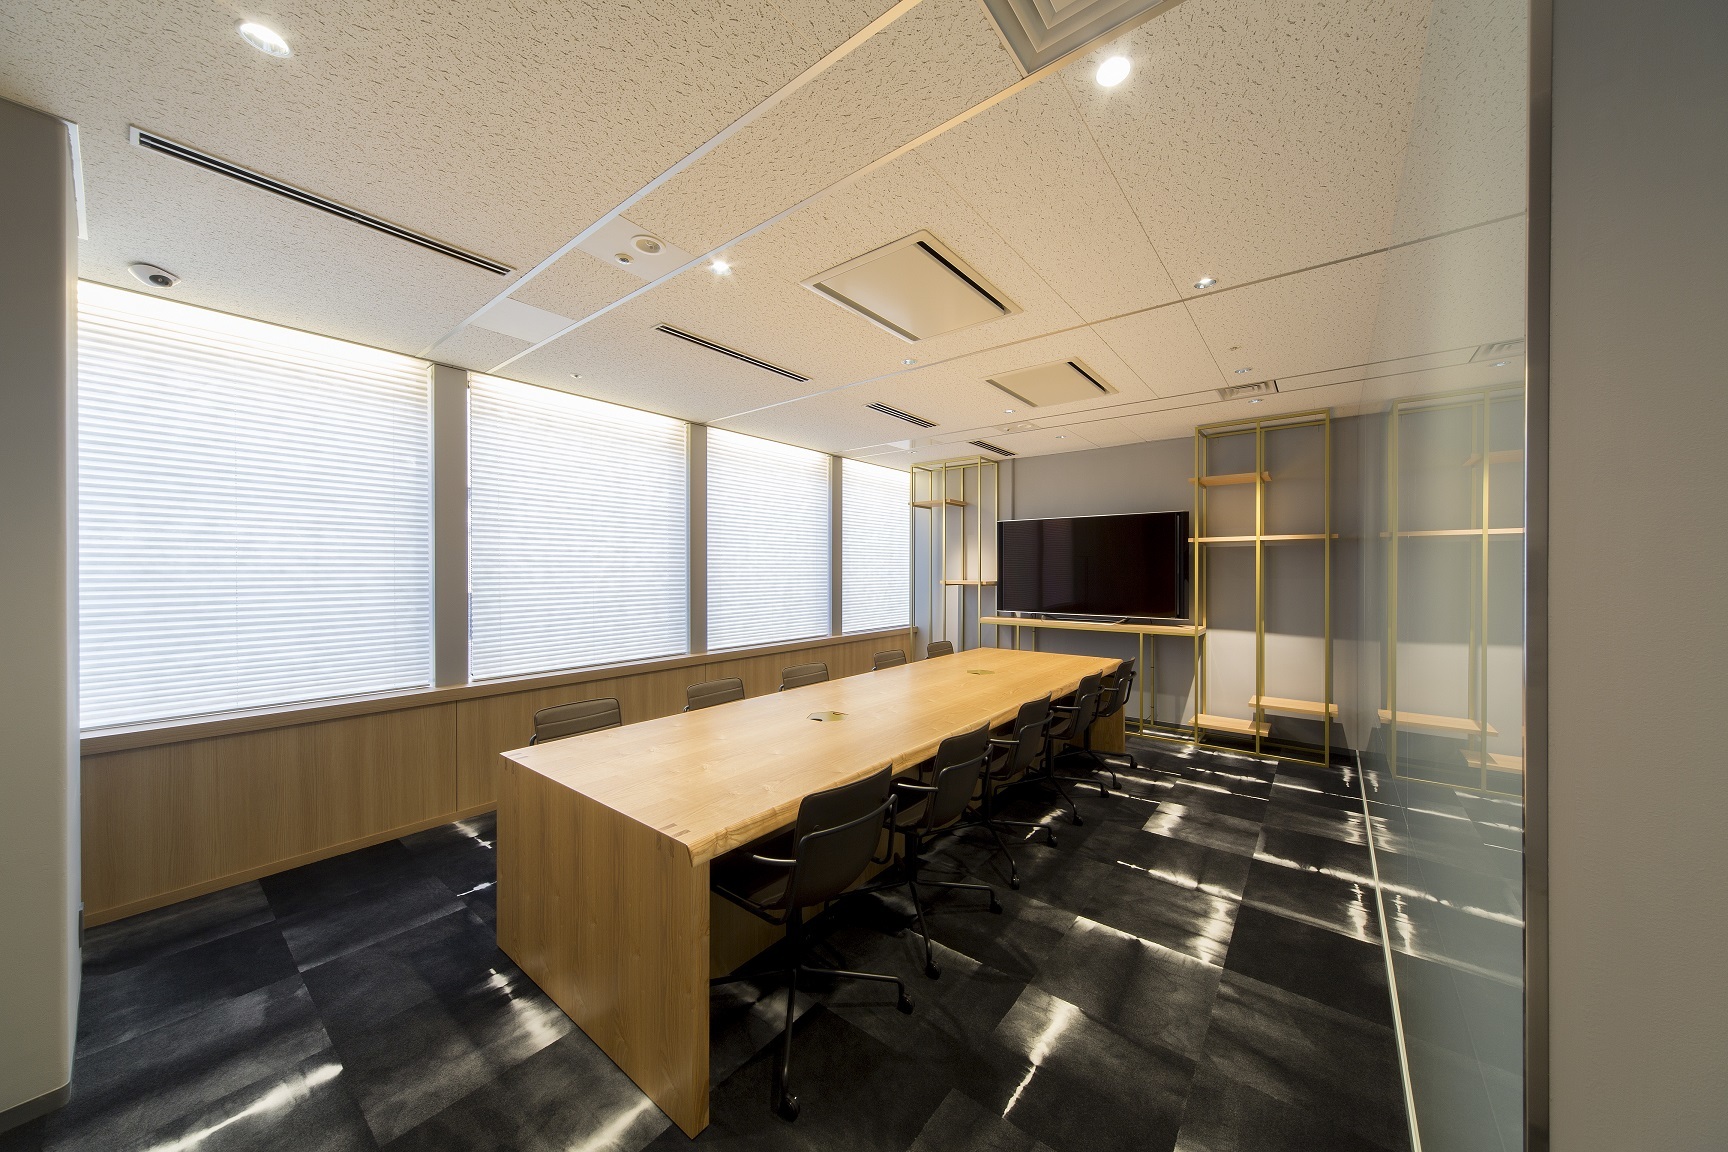 Conference room_Meeting rooms are necessary for various business situations and equipped with monitors.